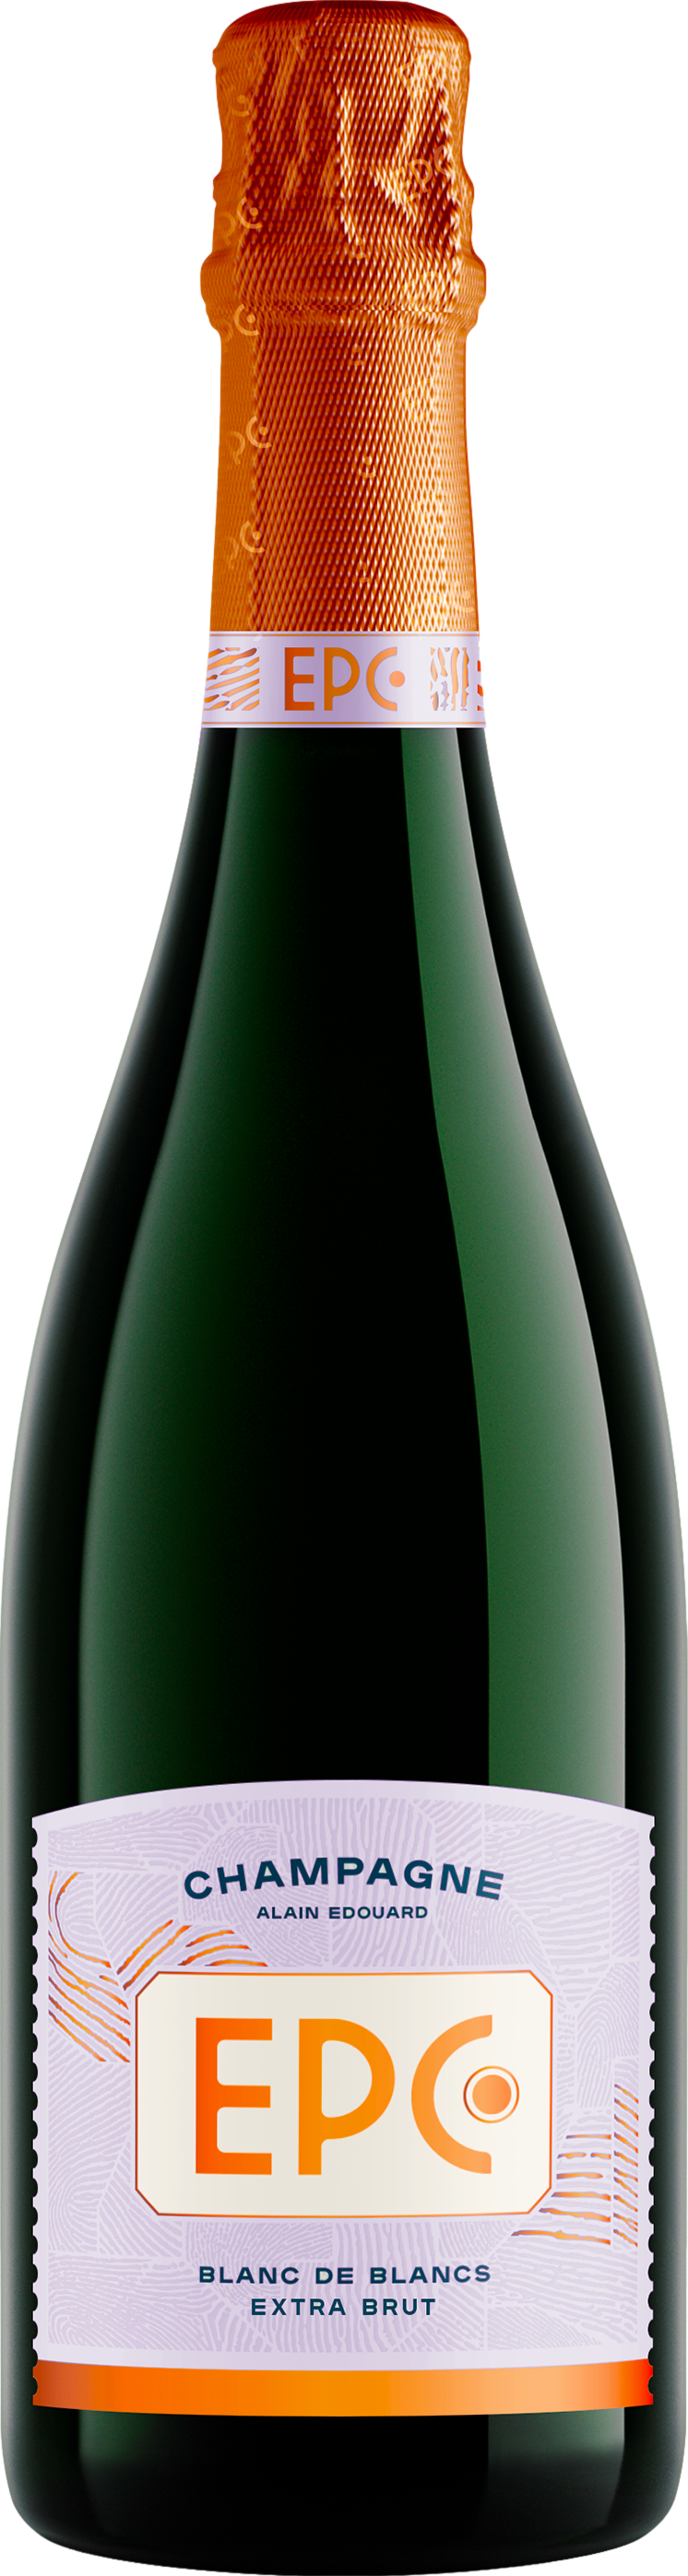 Brand New günstig Kaufen-Champagne EPC Blanc de Blancs Extra Brut. Champagne EPC Blanc de Blancs Extra Brut <![CDATA[Drink it now or cellar for up to 8 years. No need to decant.   EPC is a new French brand, created by three friends to promote a modern image of Champagnes, with th